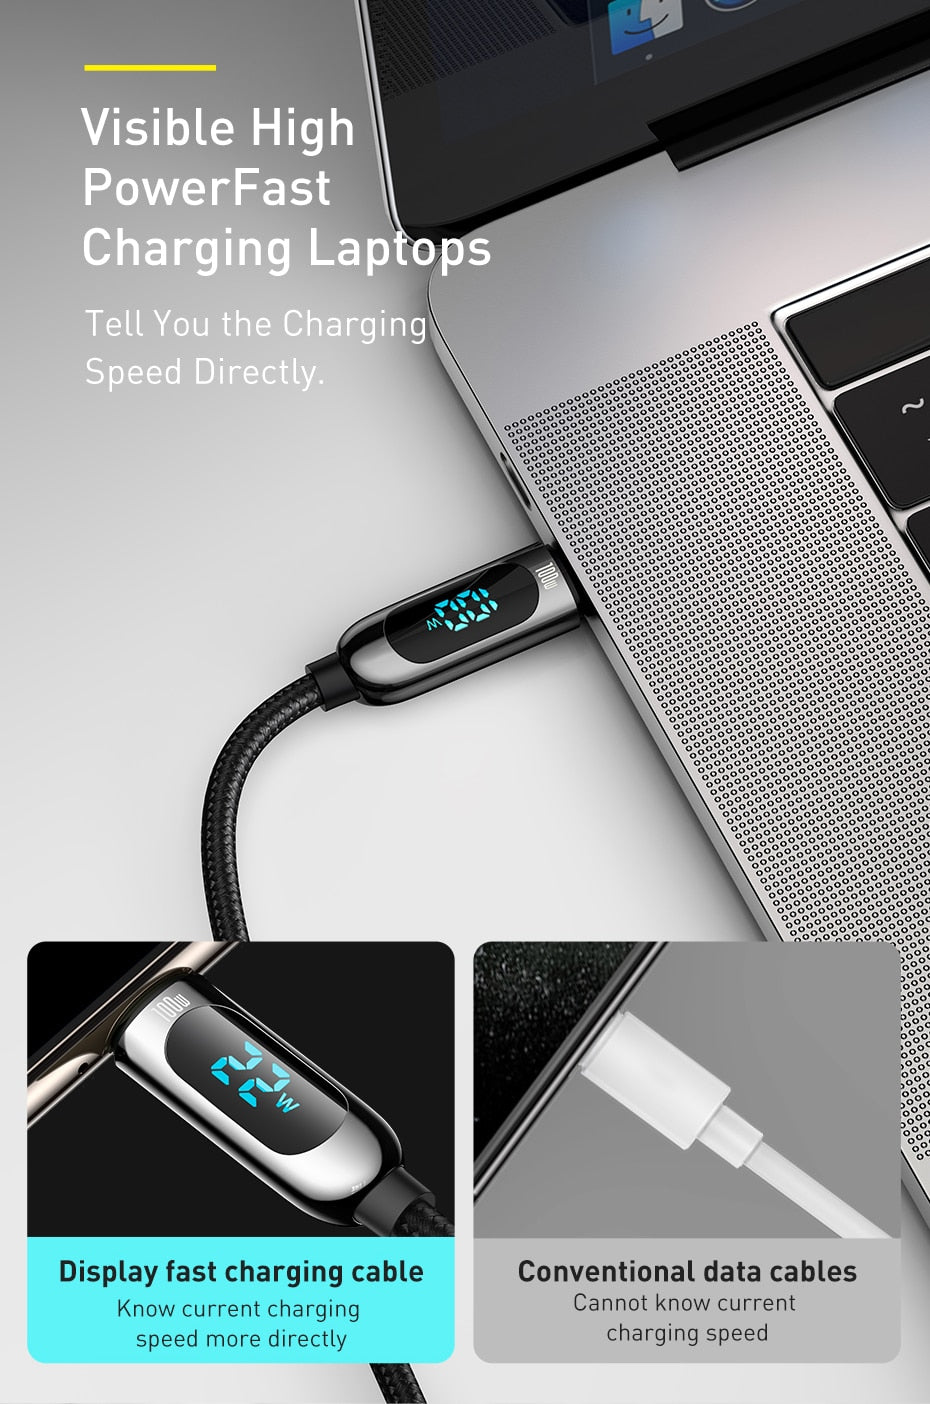 Baseus PD 100W USB C Cable Fast Charging Type C Cable